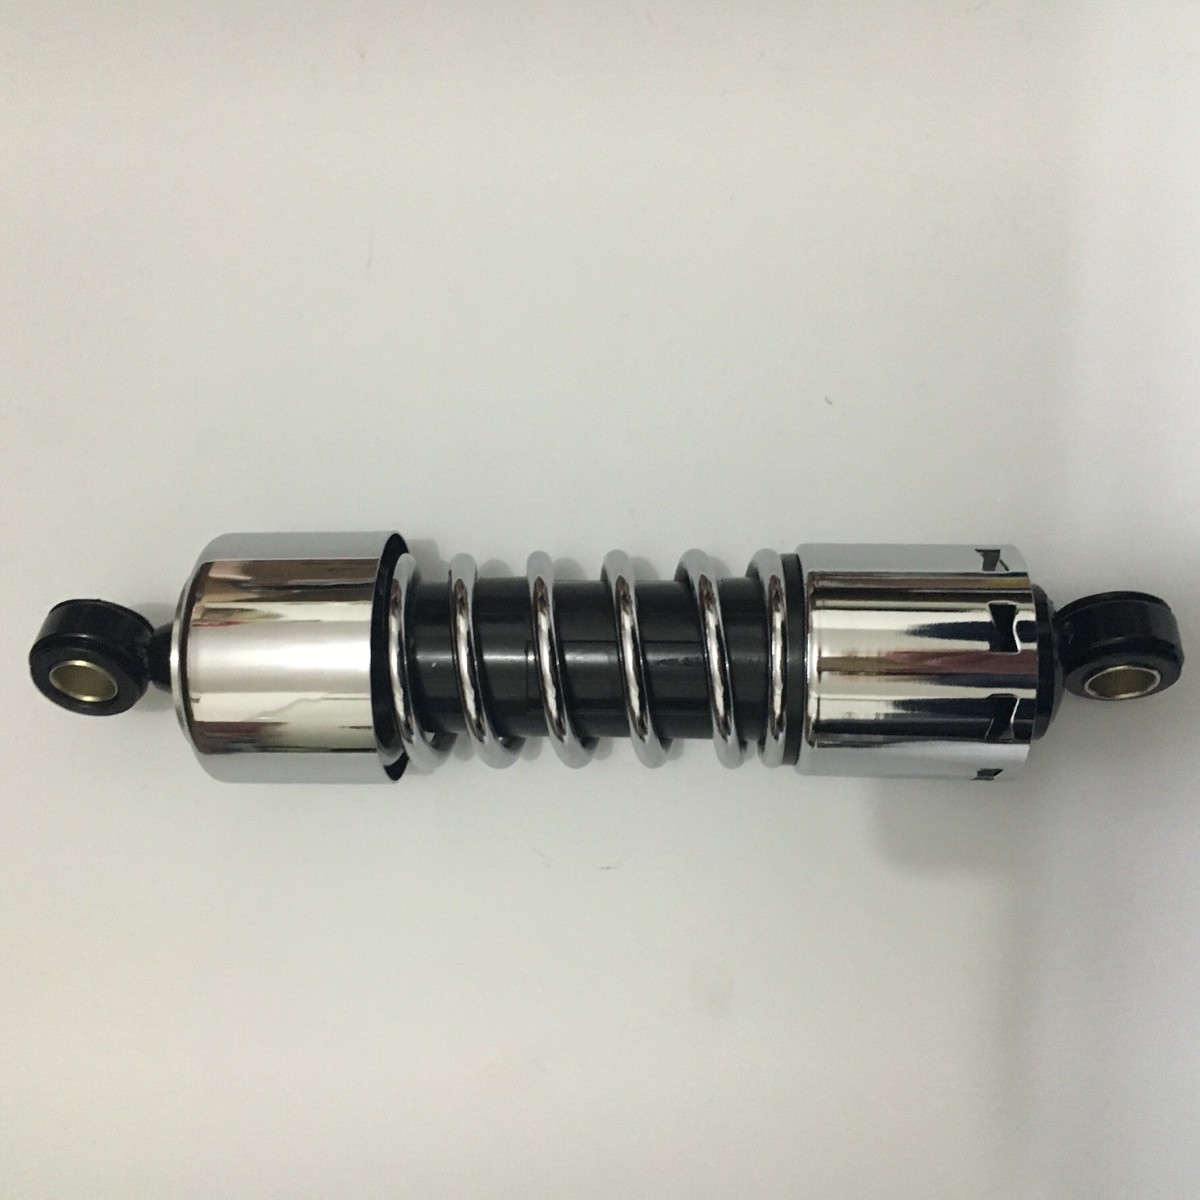 Wholesale Fatboy Dyna Motorcycle Shock Absorber 12inch 12.5 Inch For Harley Davidson from china suppliers